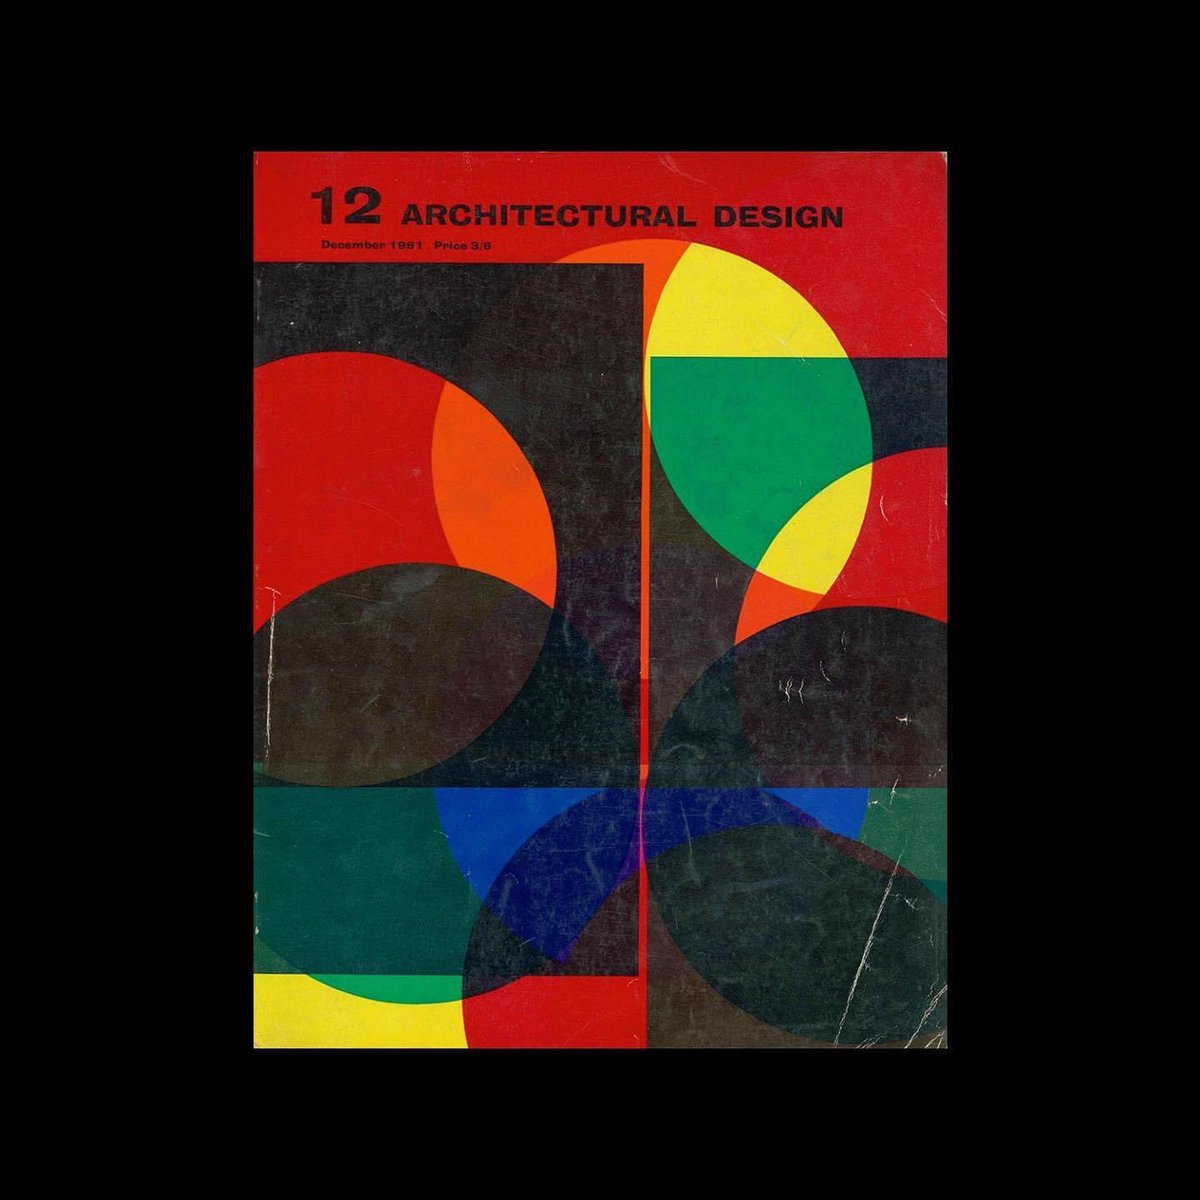 Architectural Design, December 1961. Cover design by Theo Crosby
#theocrosby #architecturaldesign